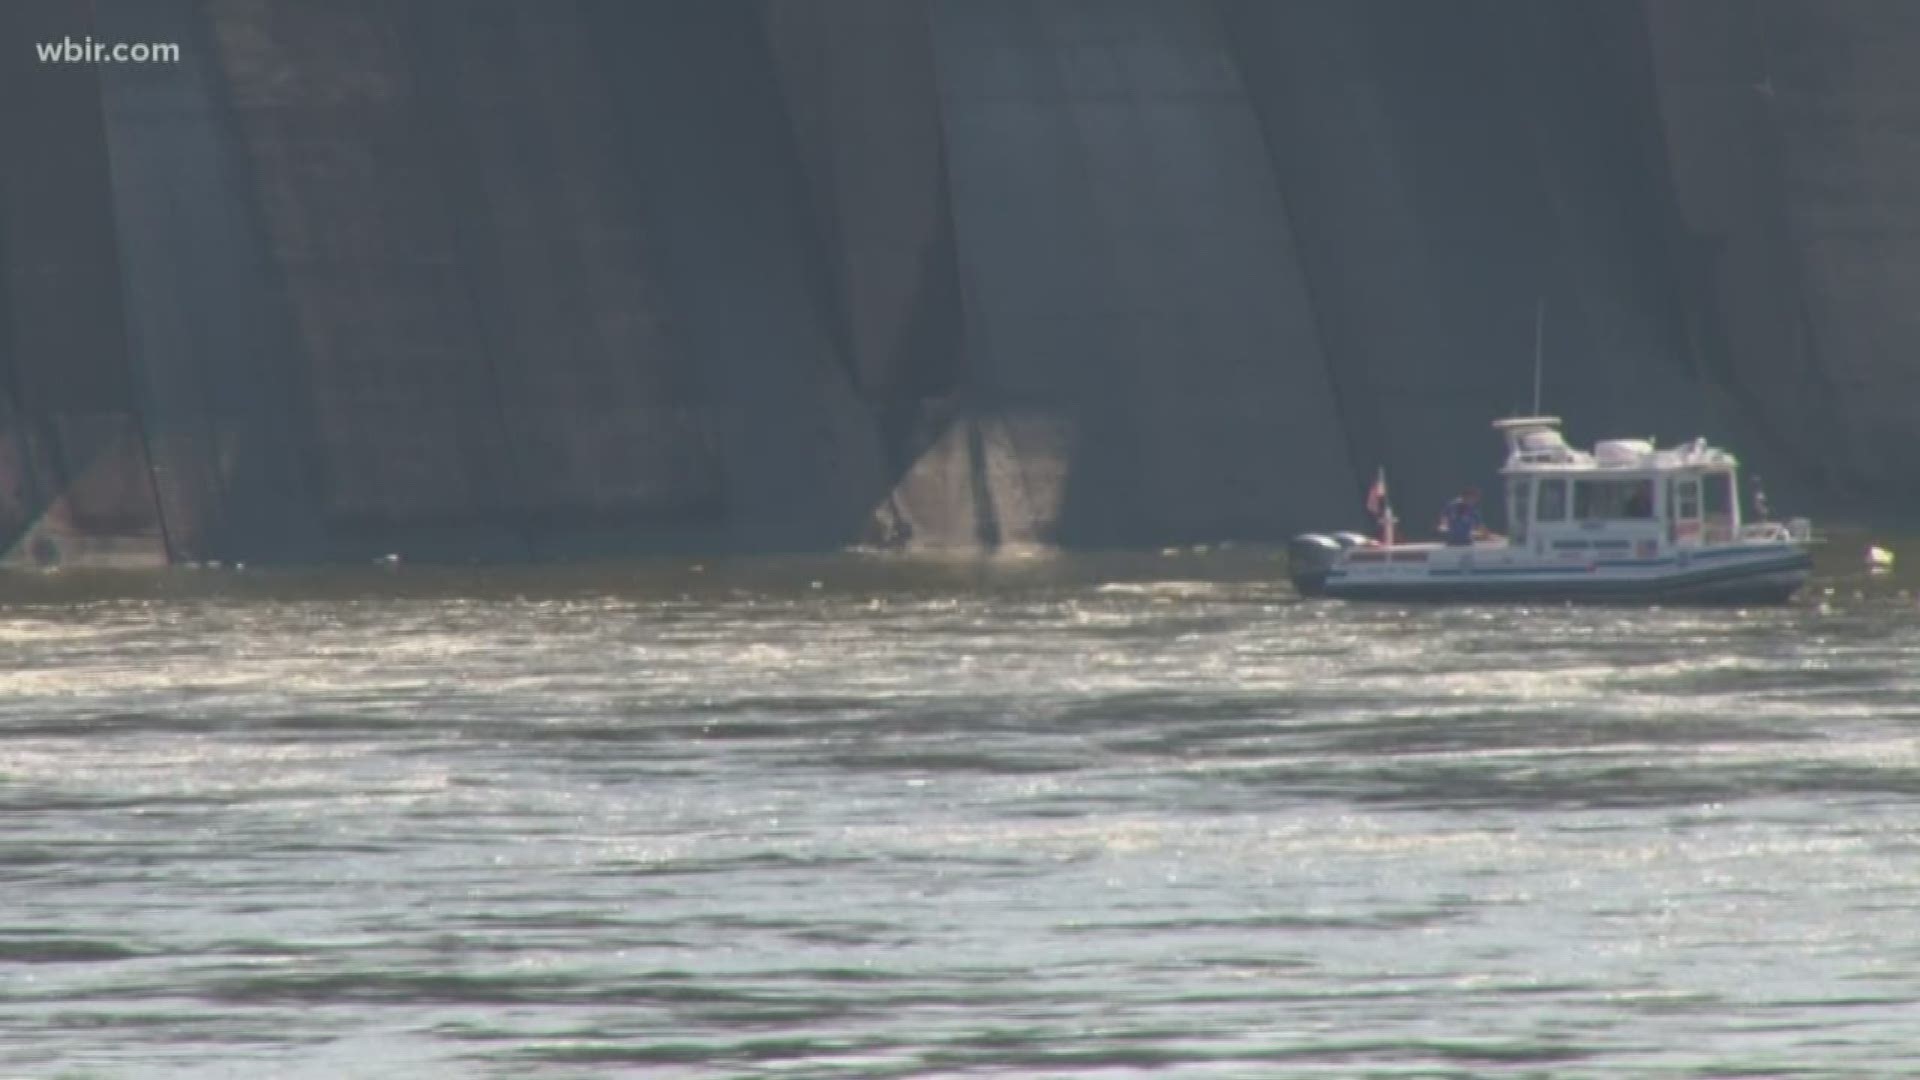 The family of a man in critical condition after a boating accident near Fort Loudoun Dam is asking for prayers tonight.